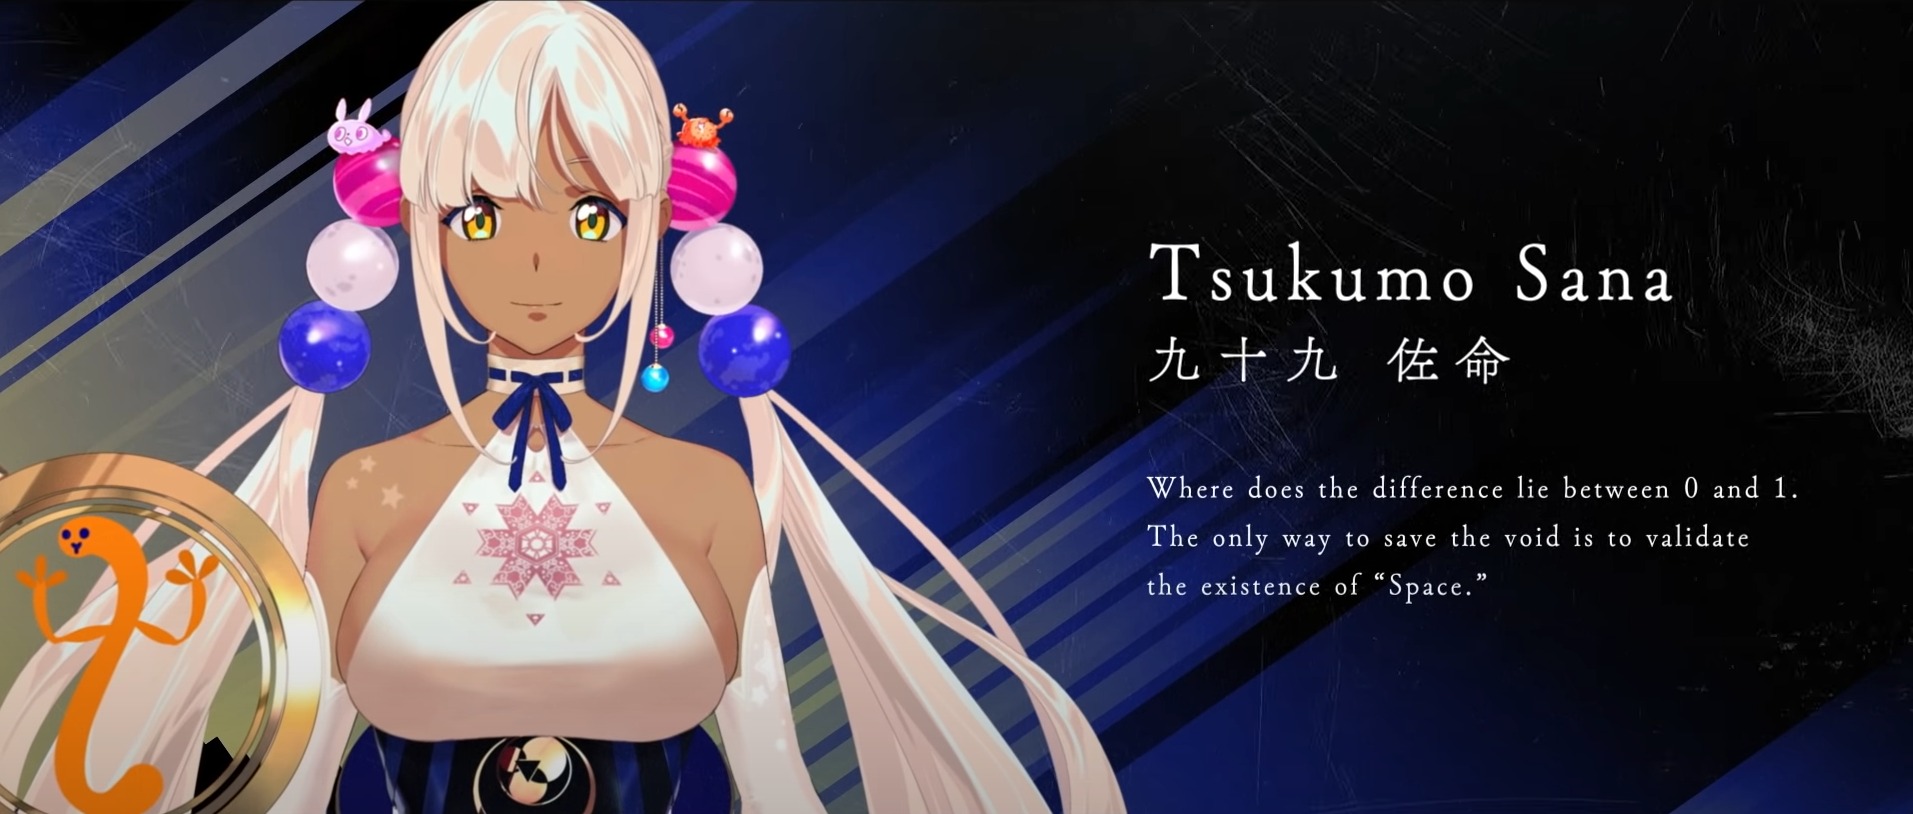 Hololive English Council Generation Debuts With Five New Characters